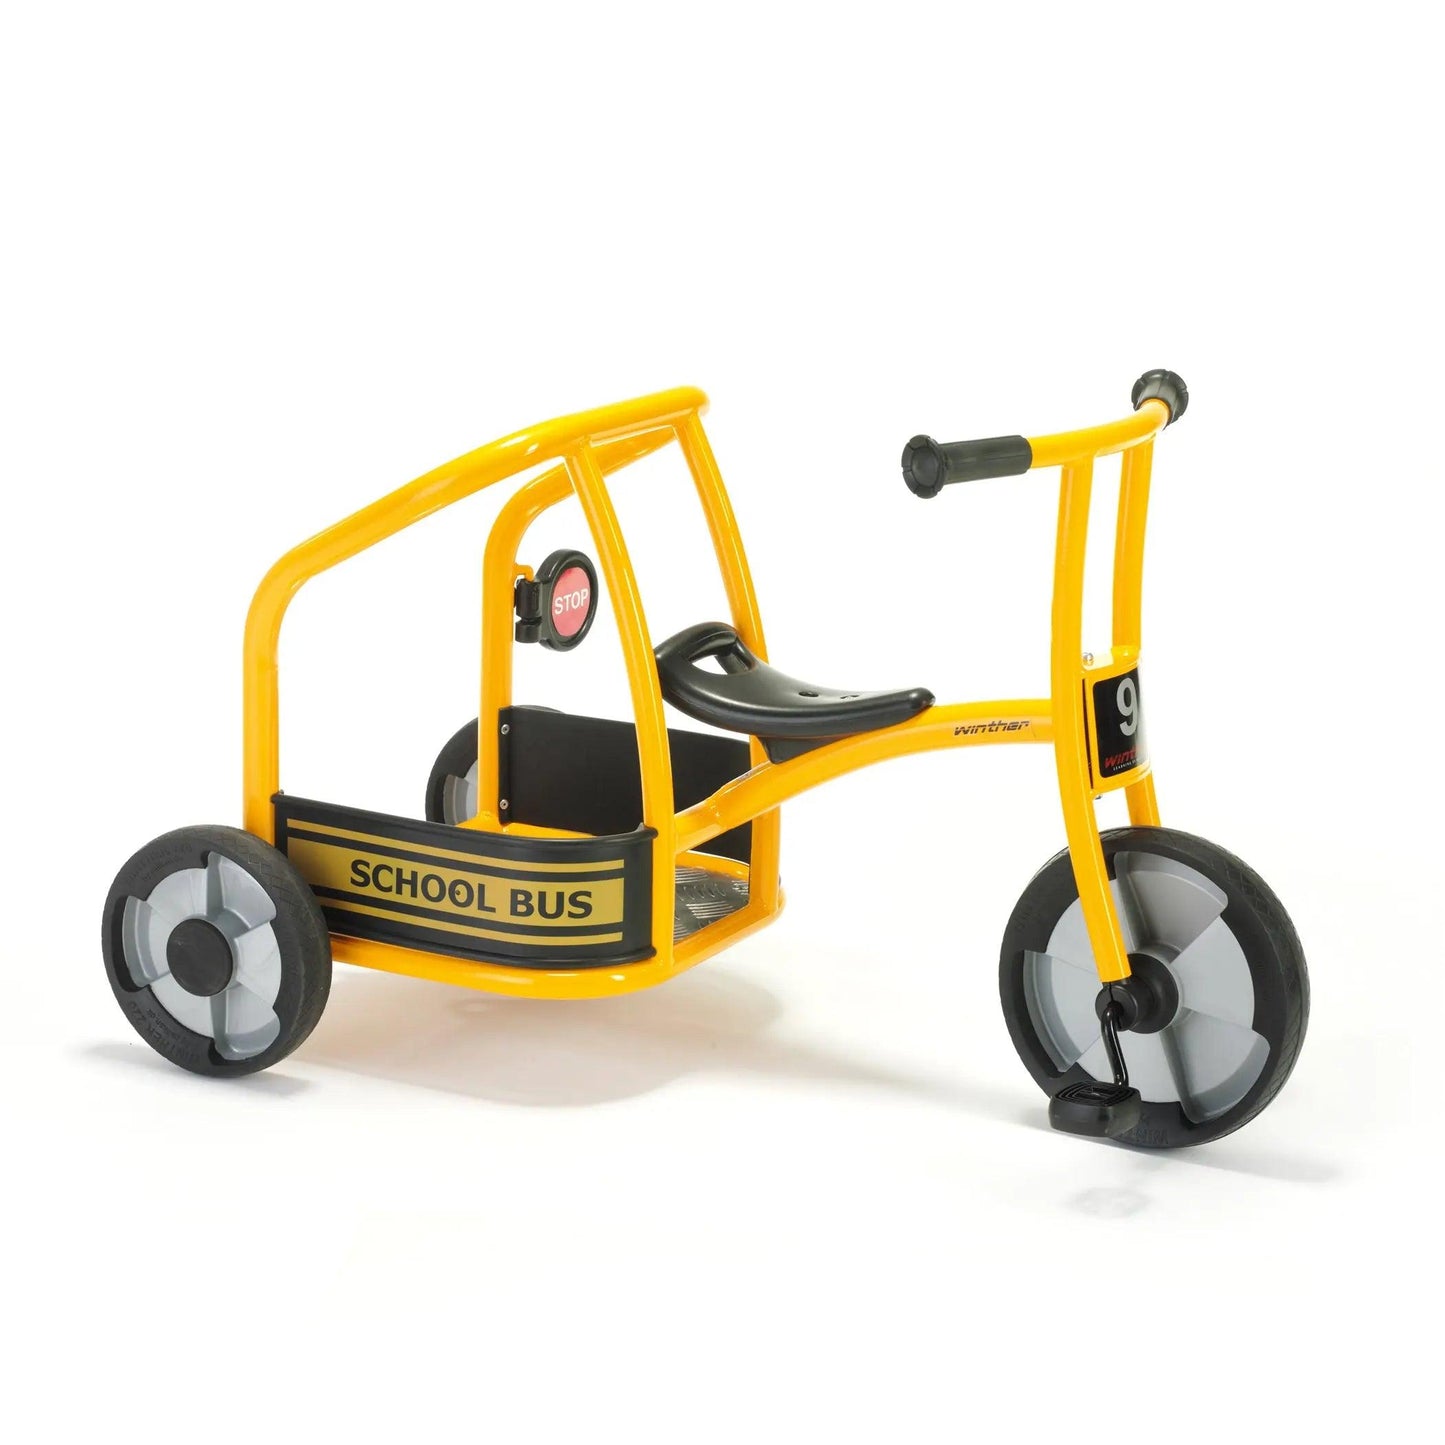 Circleline School Bus Tricycle Winther